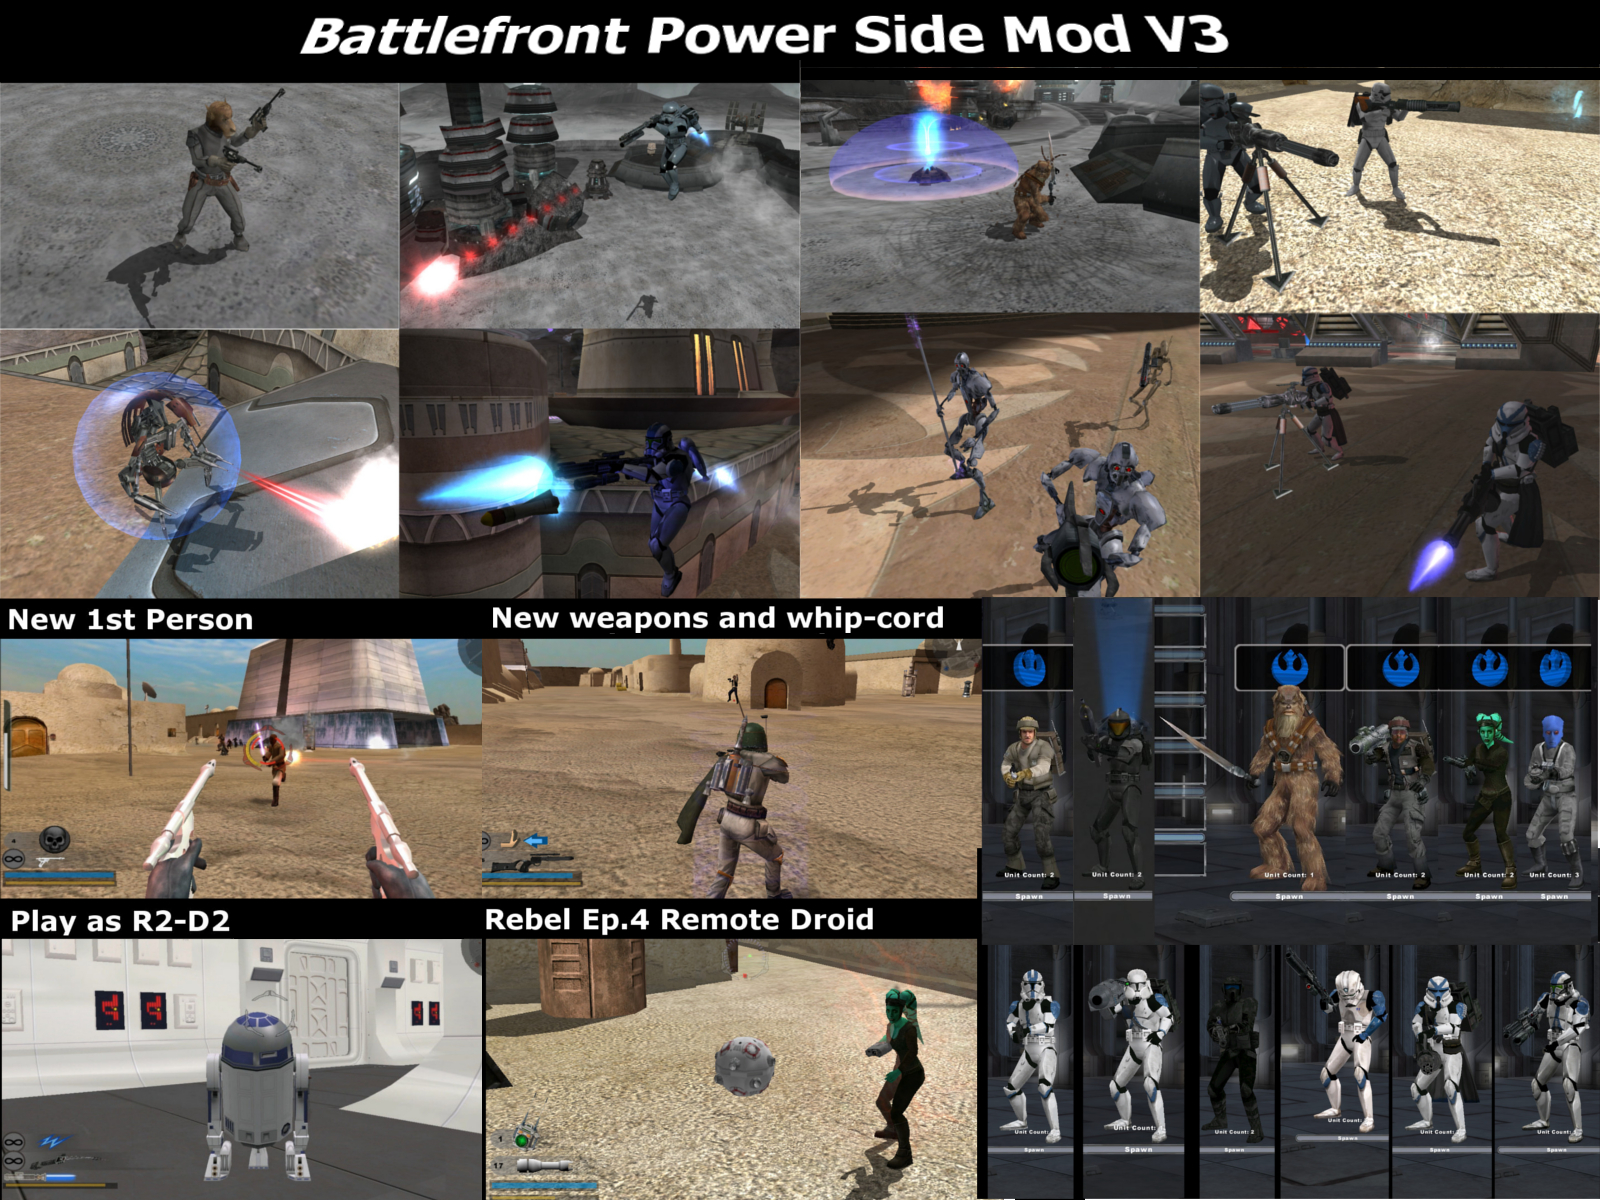 Old] How to Download Star Wars Battlefront II 2005 (PC) Free! 